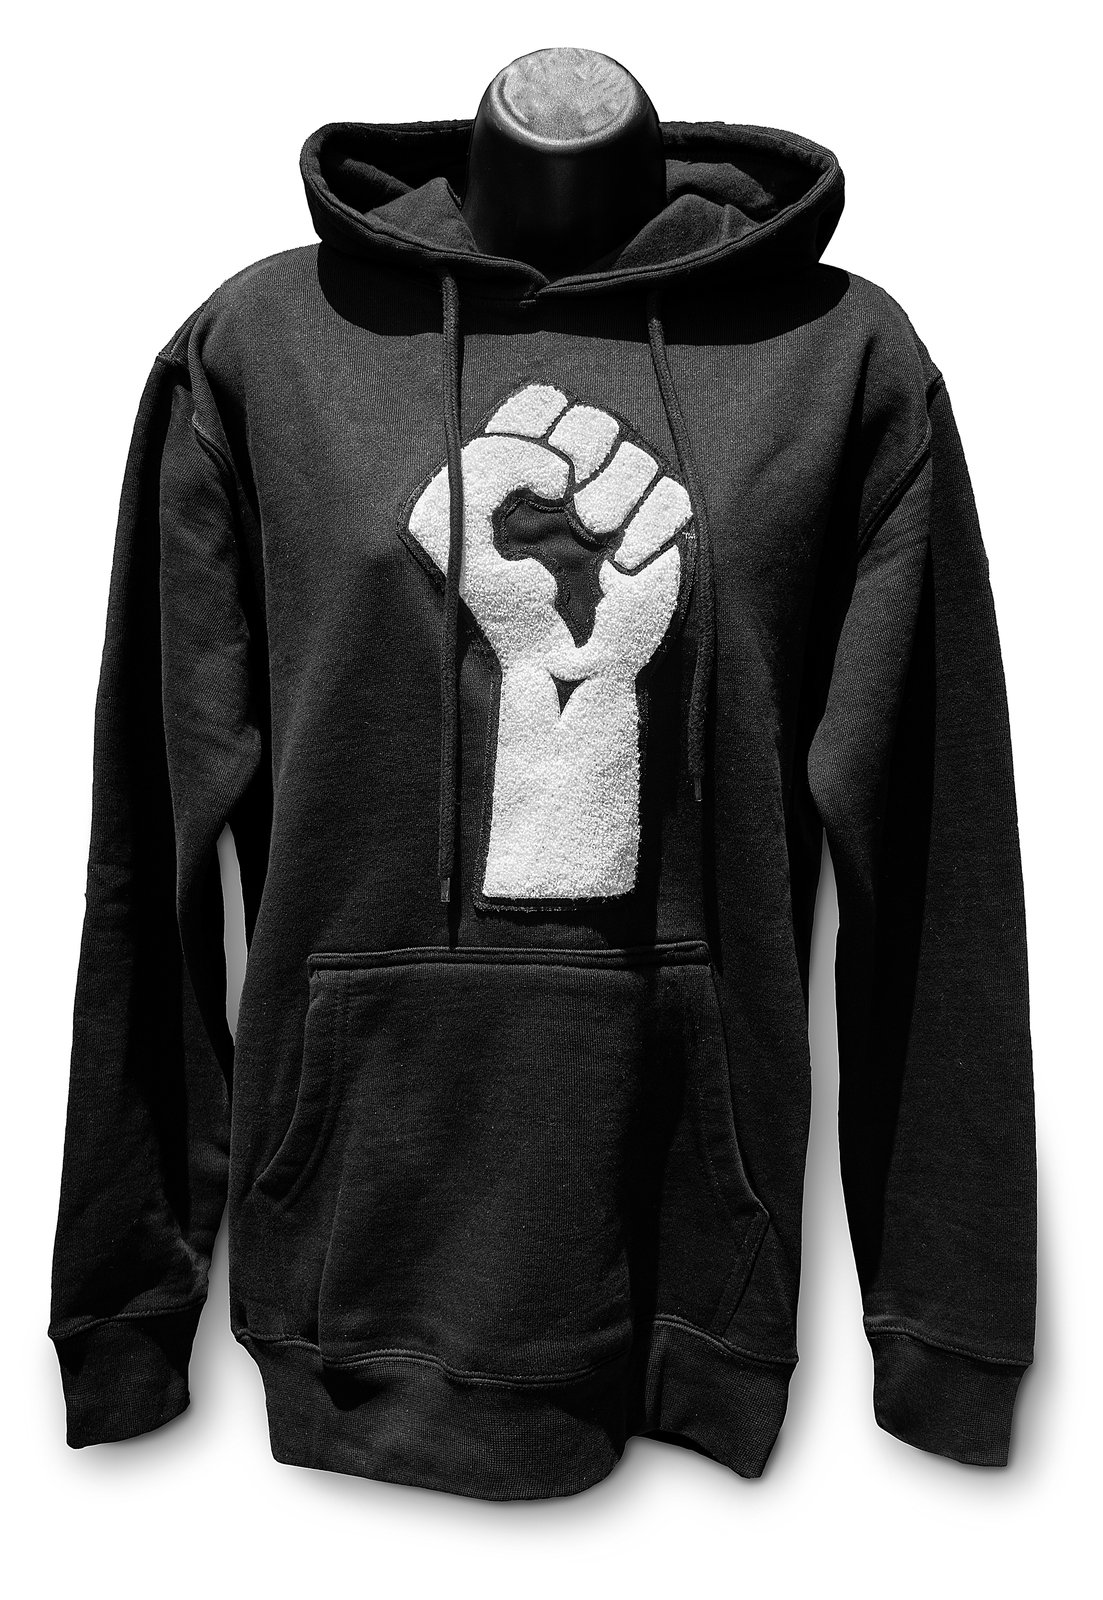 WE Chenille Hoodie Walk Empowered. The Touch The Feel